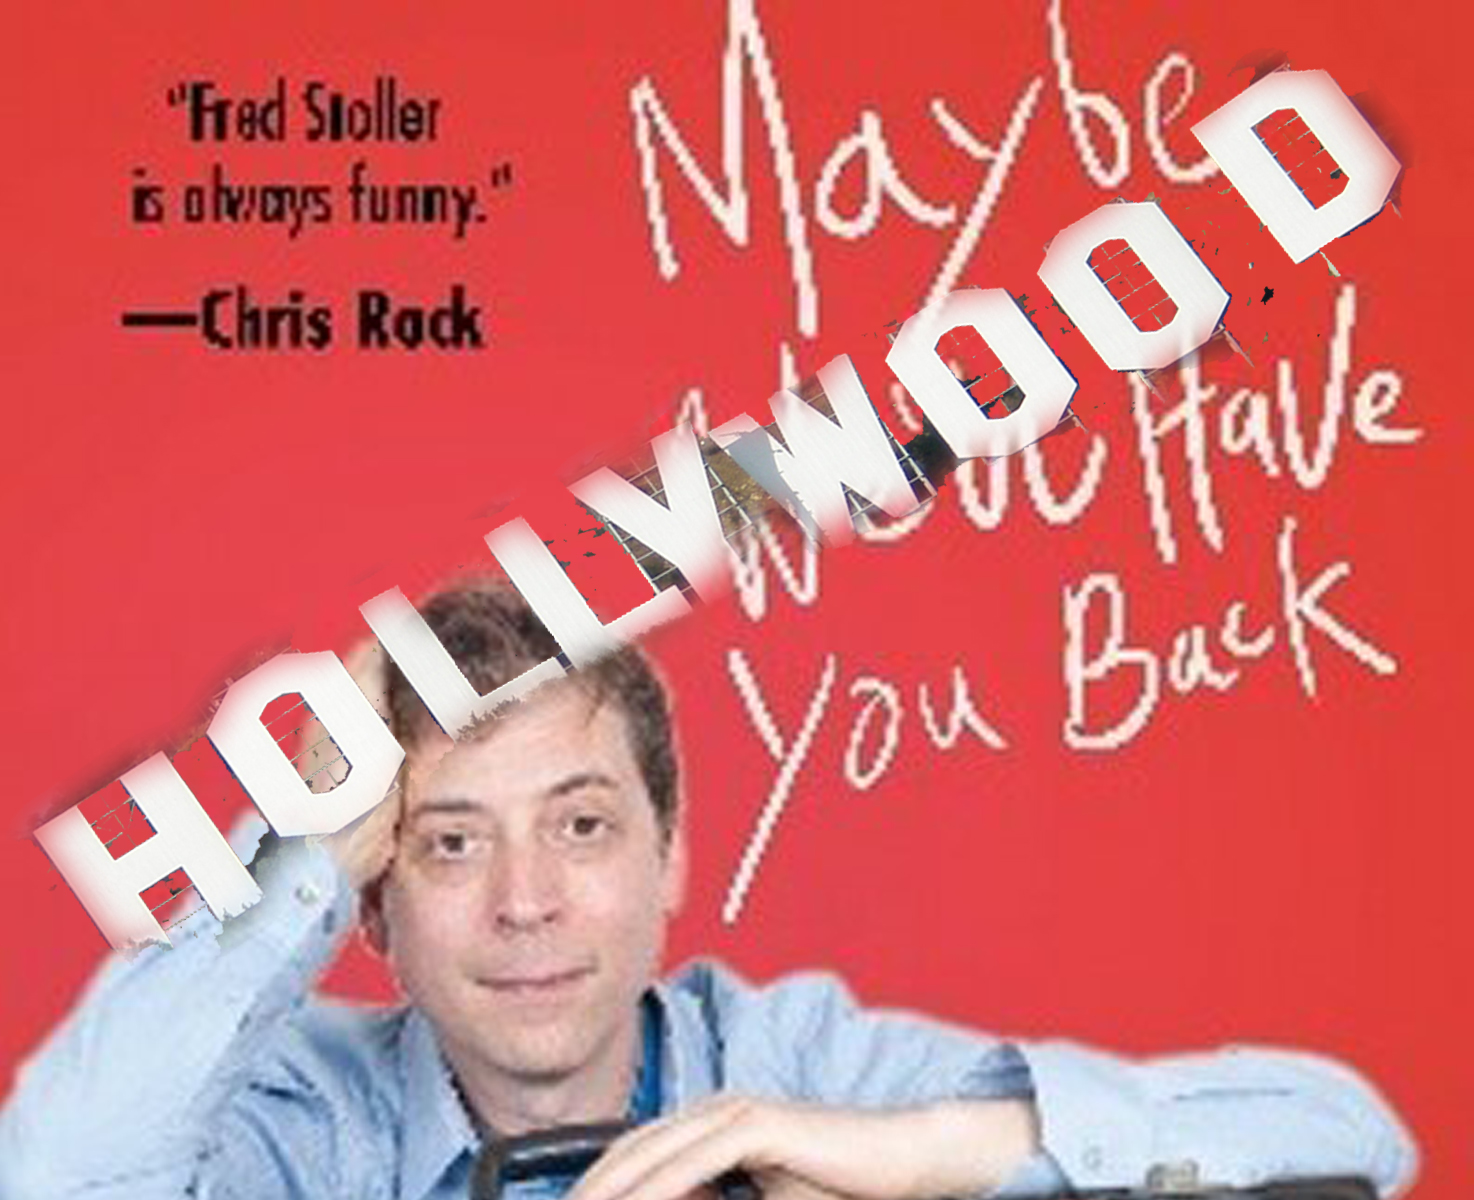 fred-stoller-quotes